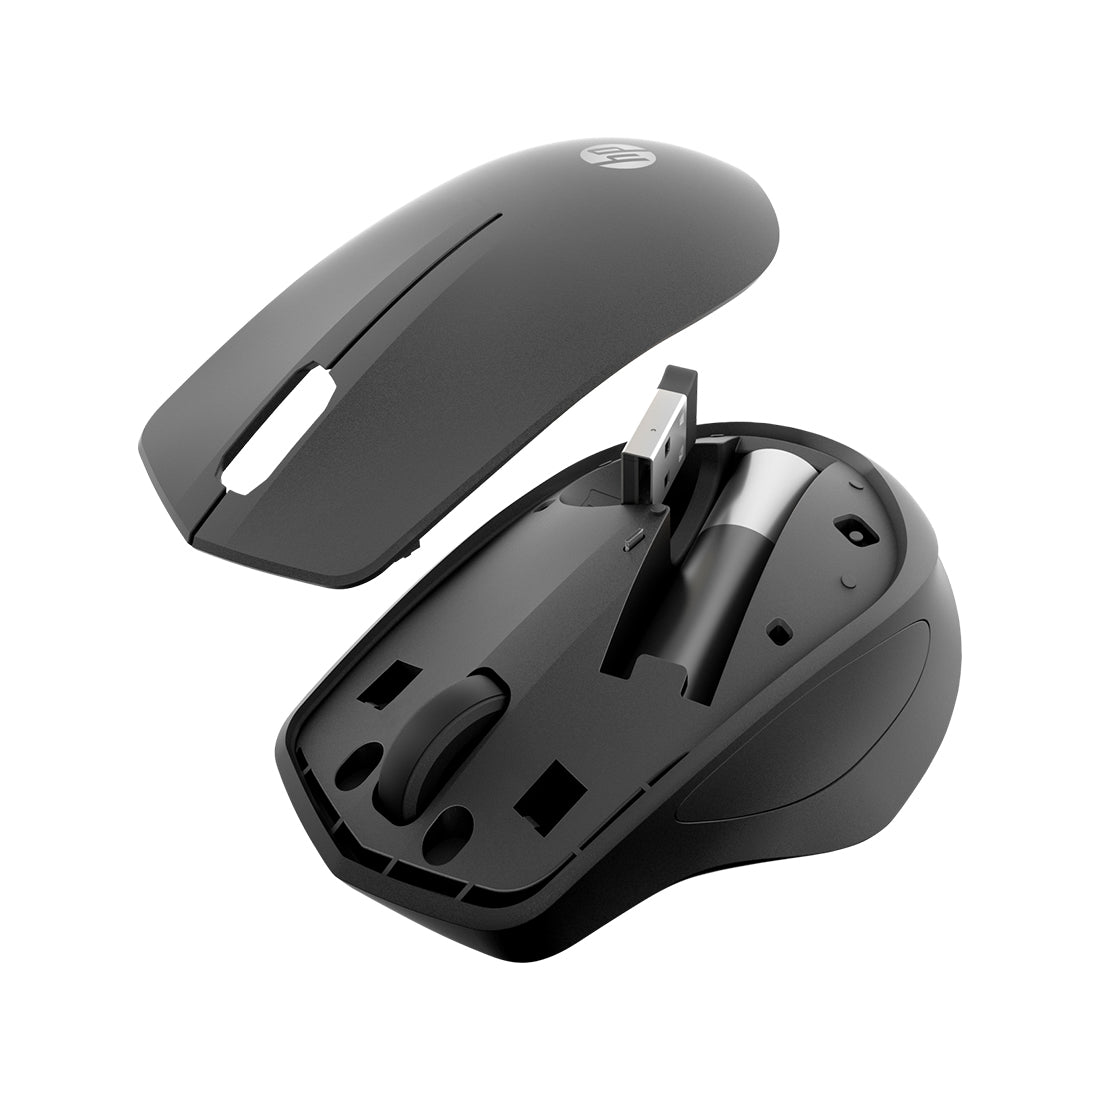 HP 280 Silent Wireless Optical Mouse with 2.4GHz Wireless Connection